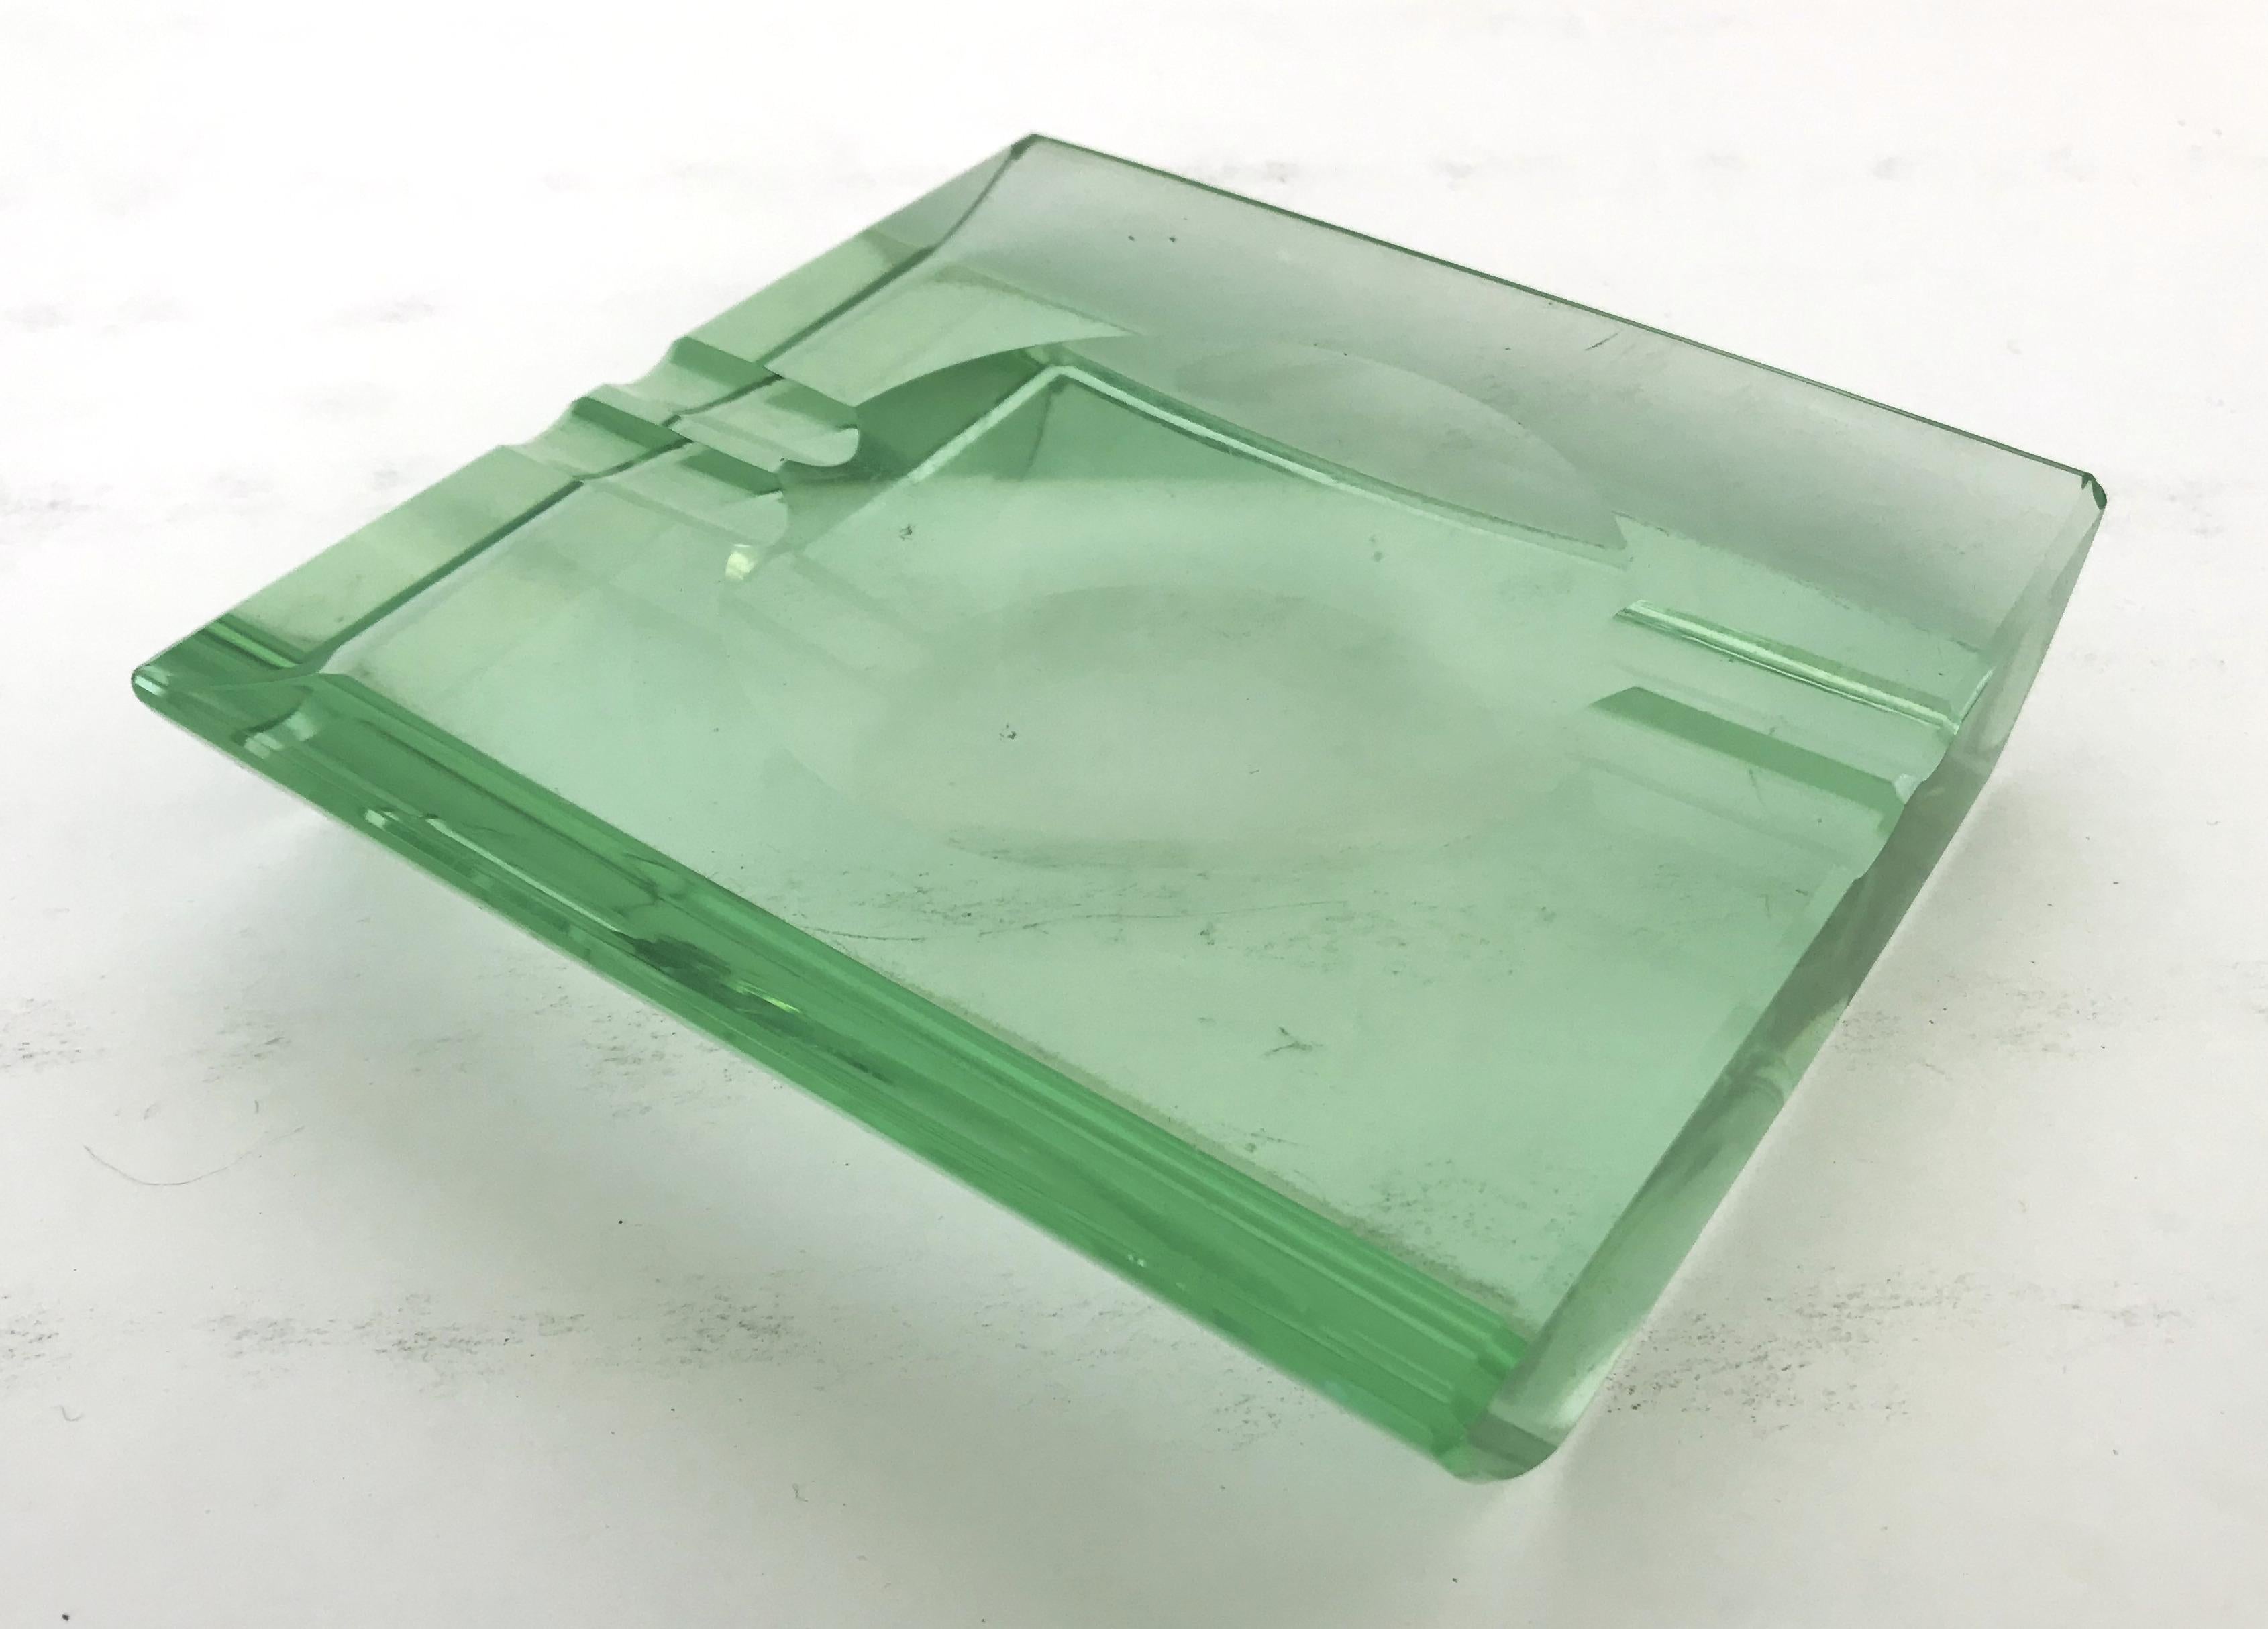 Vintage midcentury Italian beveled glass ashtray by Fontana Arte / Made in Italy circa 1960s
Measures: length 5 inches, width 5 inches, height 1 inch
1 in stock in Palm Springs ON 20% OFF SALE for $719 !!!
Order Reference: FABIOLTD G166
This piece